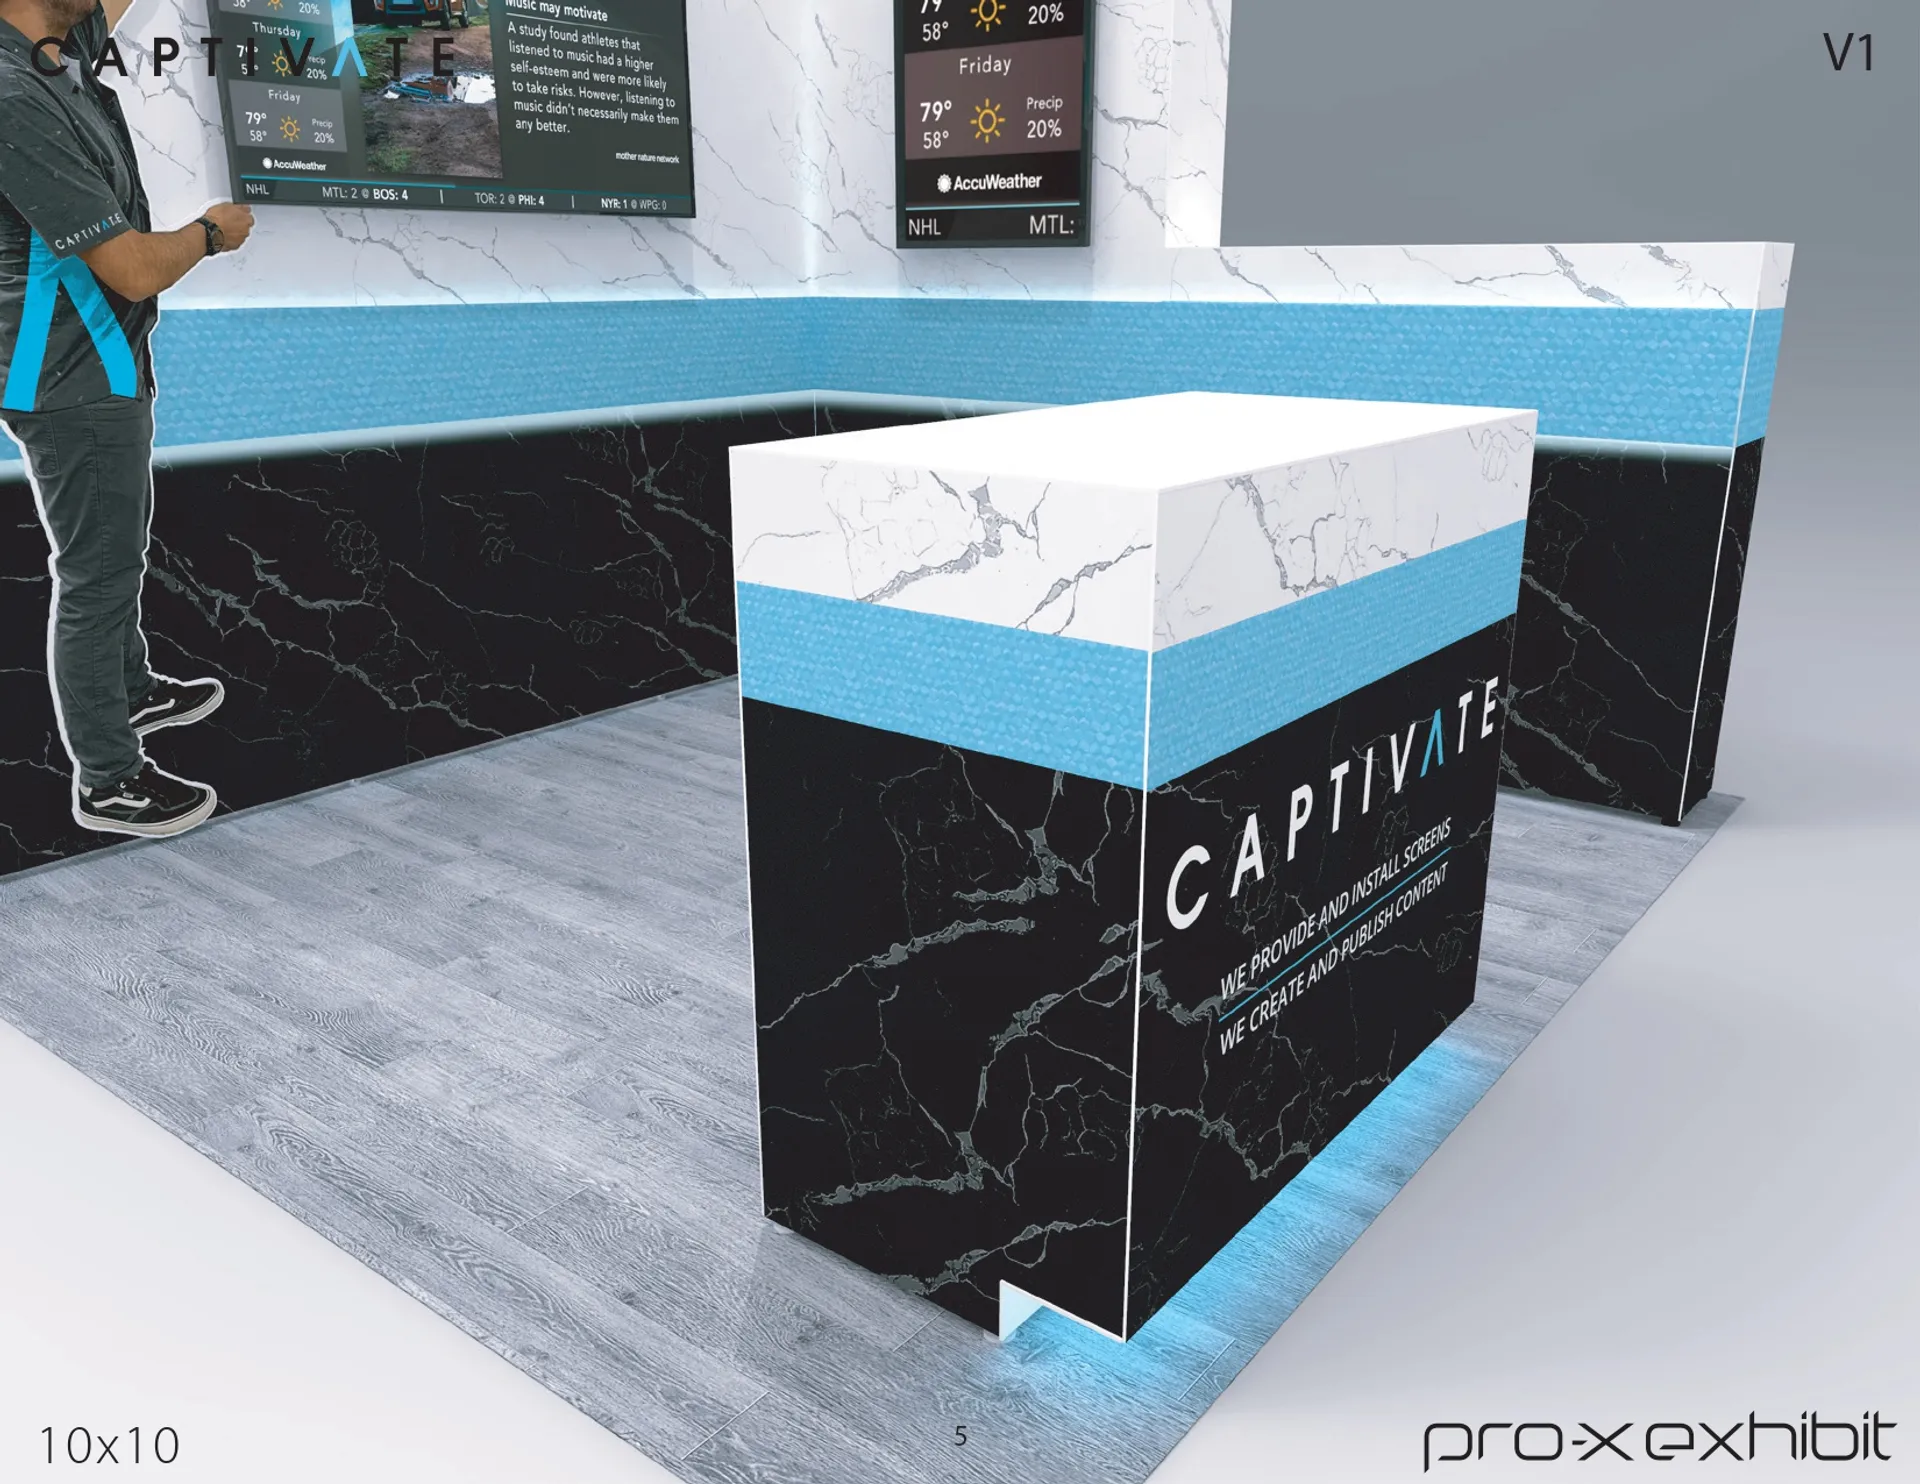 booth-design-projects/Pro-X Exhibits/2024-04-18-10x10-PERIMETER-Project-114/Captivate_10x10_NAA_Pro-X_Exhibit_V1-5_page-0001-2ujz3c.jpg